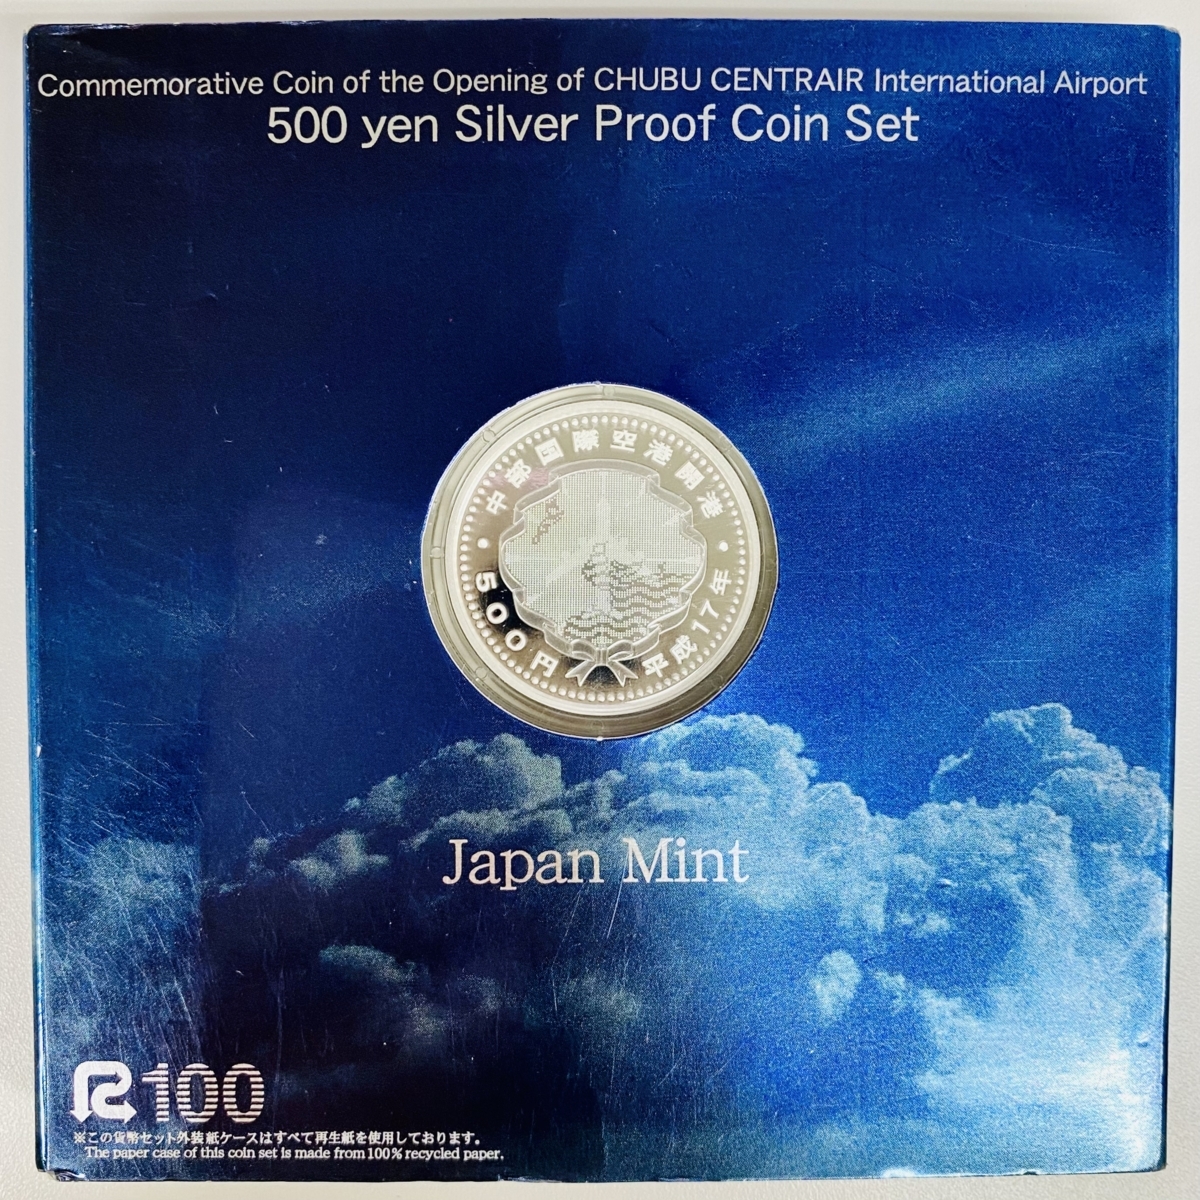  Chuubu International Airport .. memory . 100 jpy silver coin . proof money set 2005 year Heisei era 17 year silver approximately 15.6g commemorative coin precious metal medal coin structure . department 